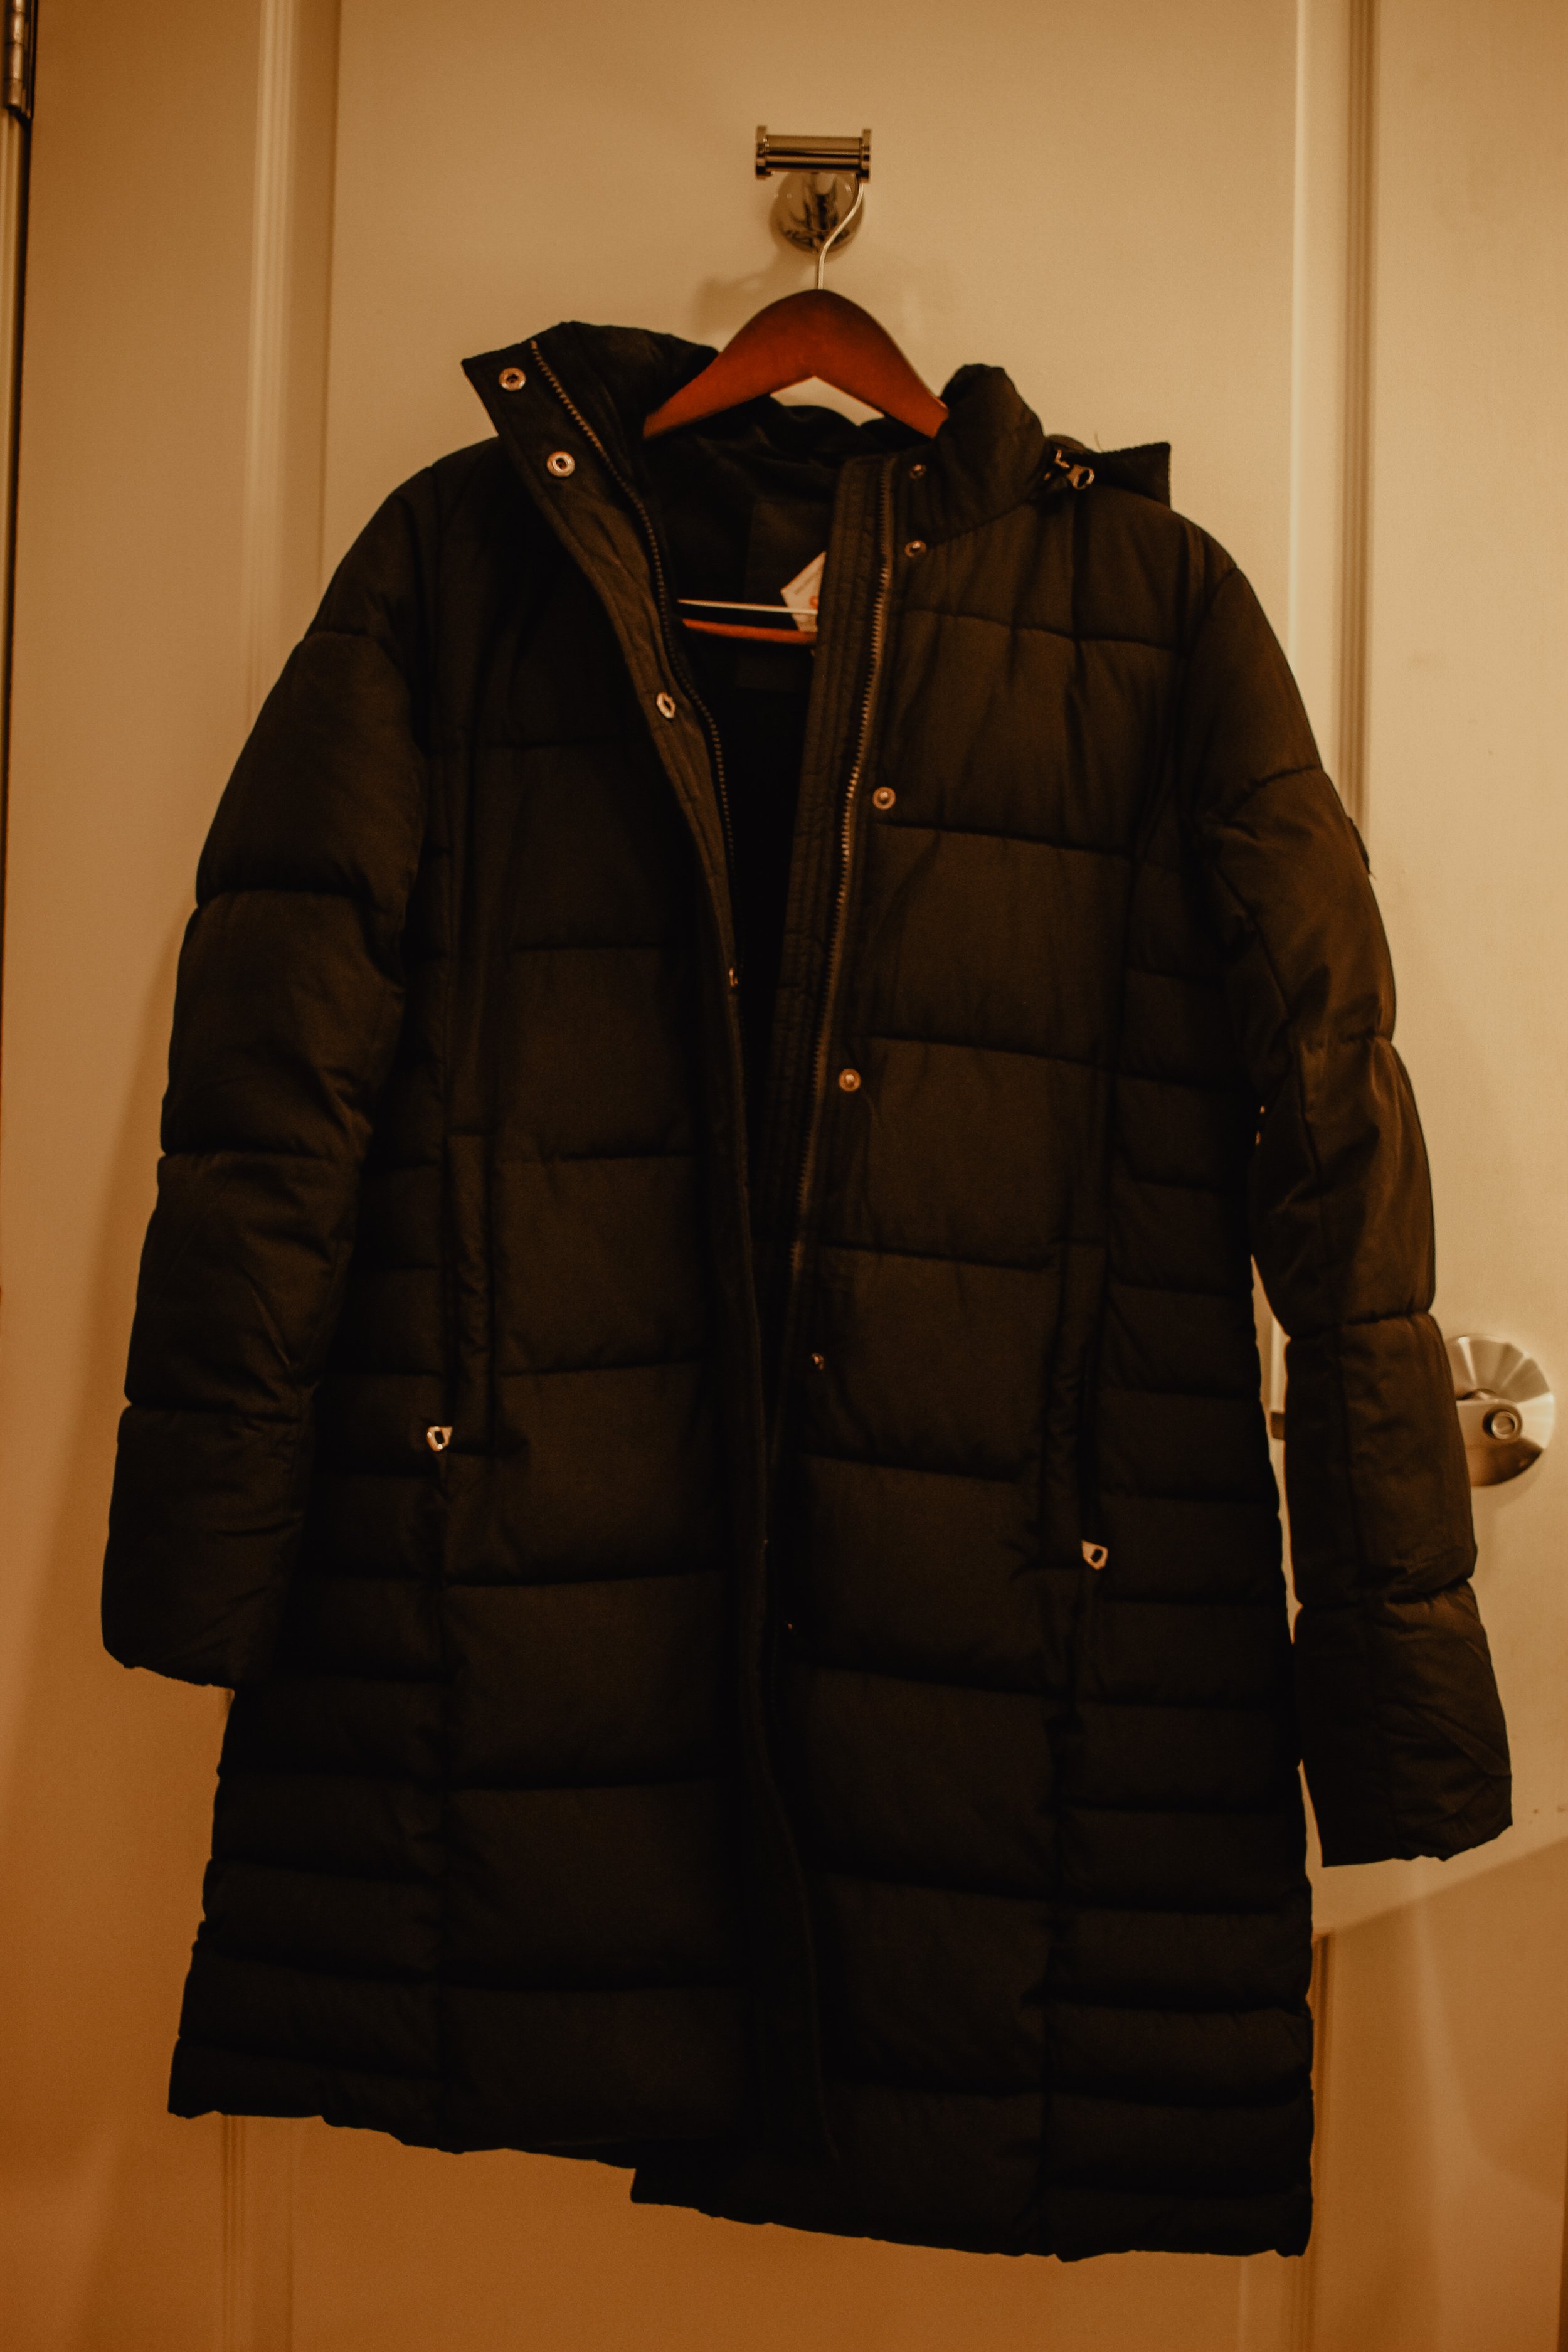 Gifted Puffer Jacket